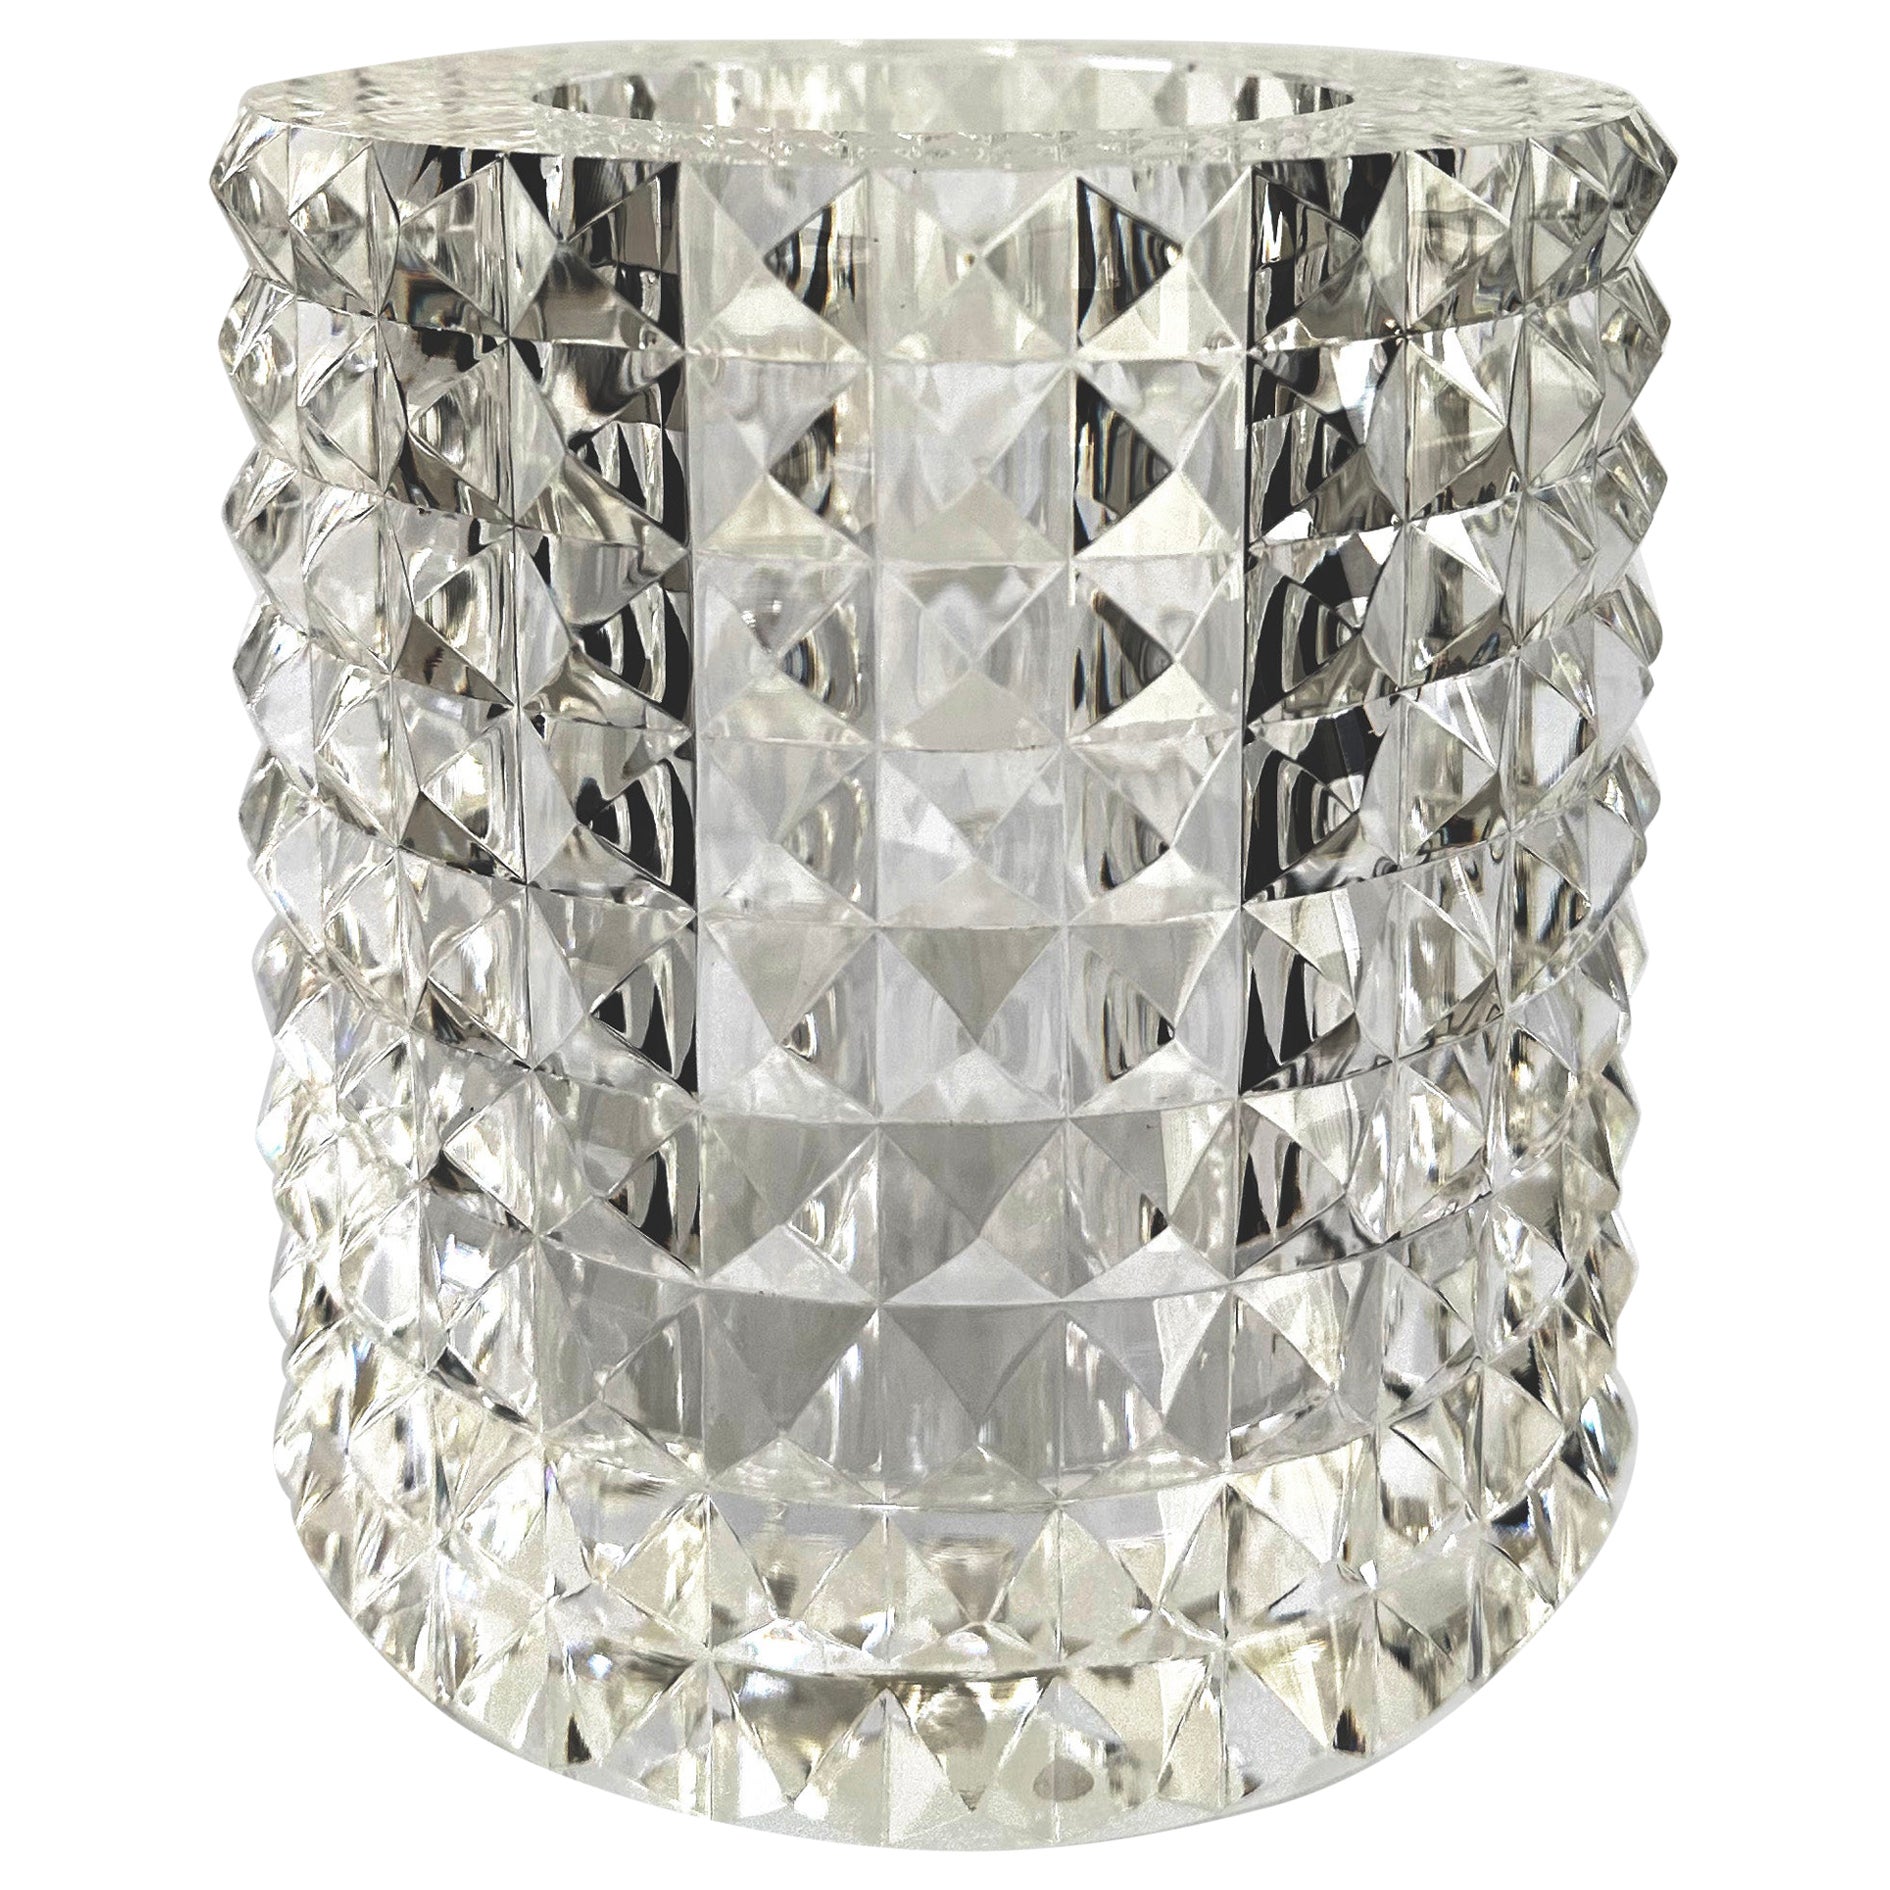  Veritas Home - Large Contemporary Clear Optical Glass Pyramid Vase 